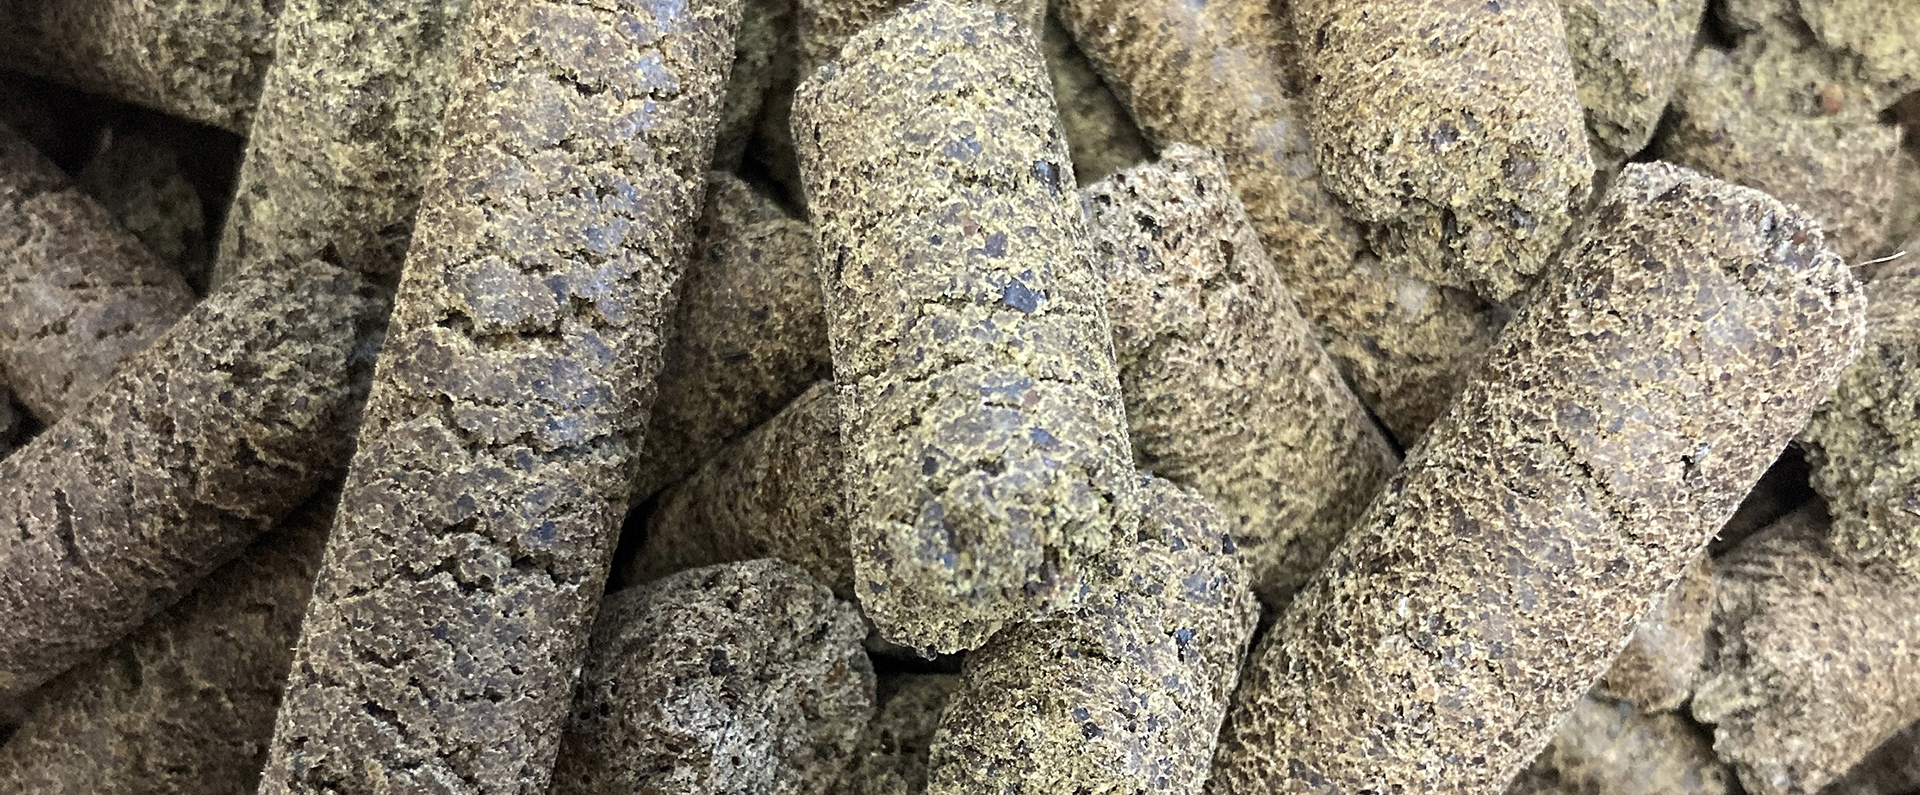 Cattle feed pellets made from hempseed. 